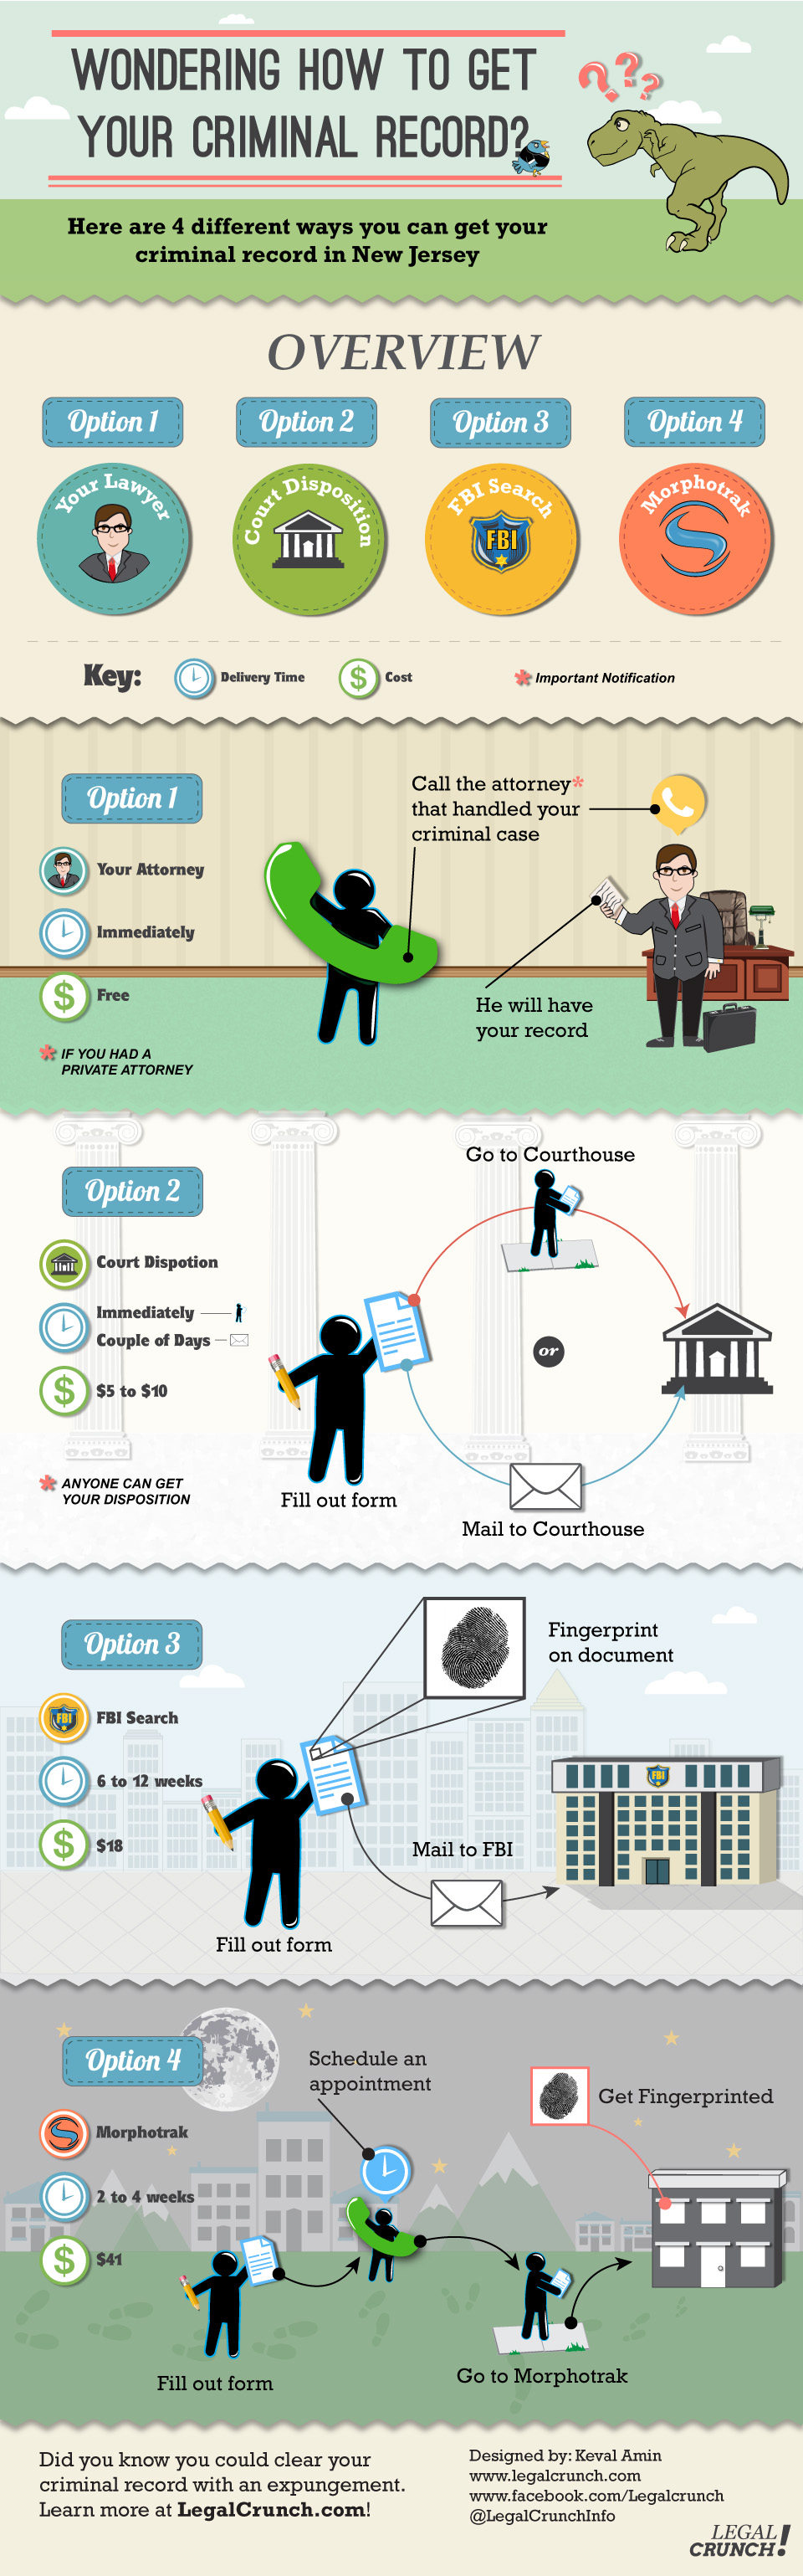 How to Get Your Criminal Record [Infographic]